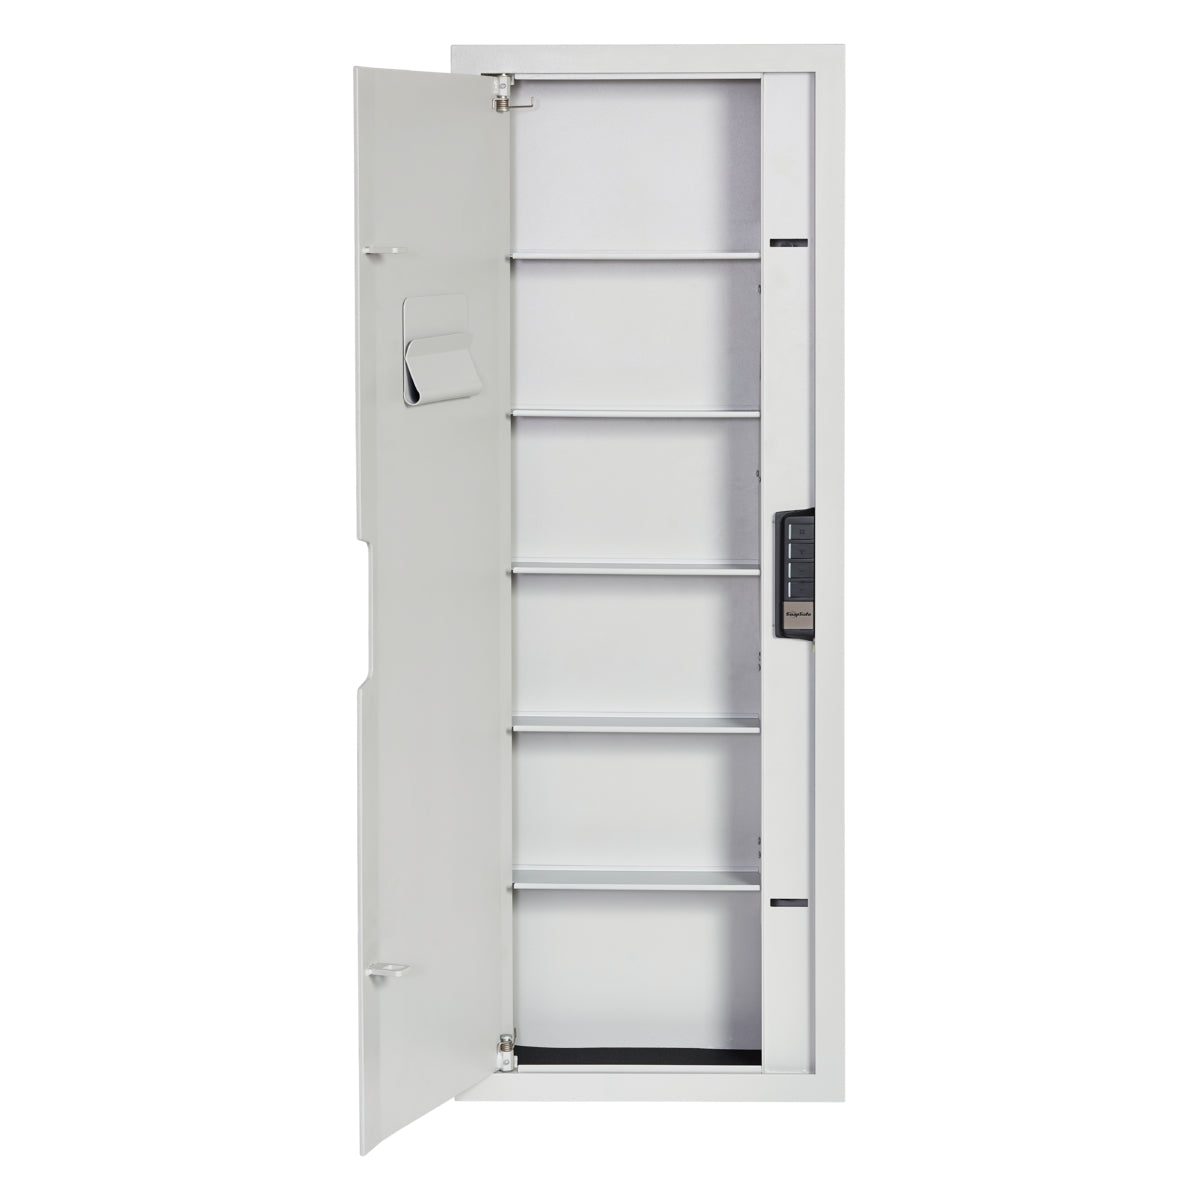 SnapSafe 75414 Tall In-Wall Safe